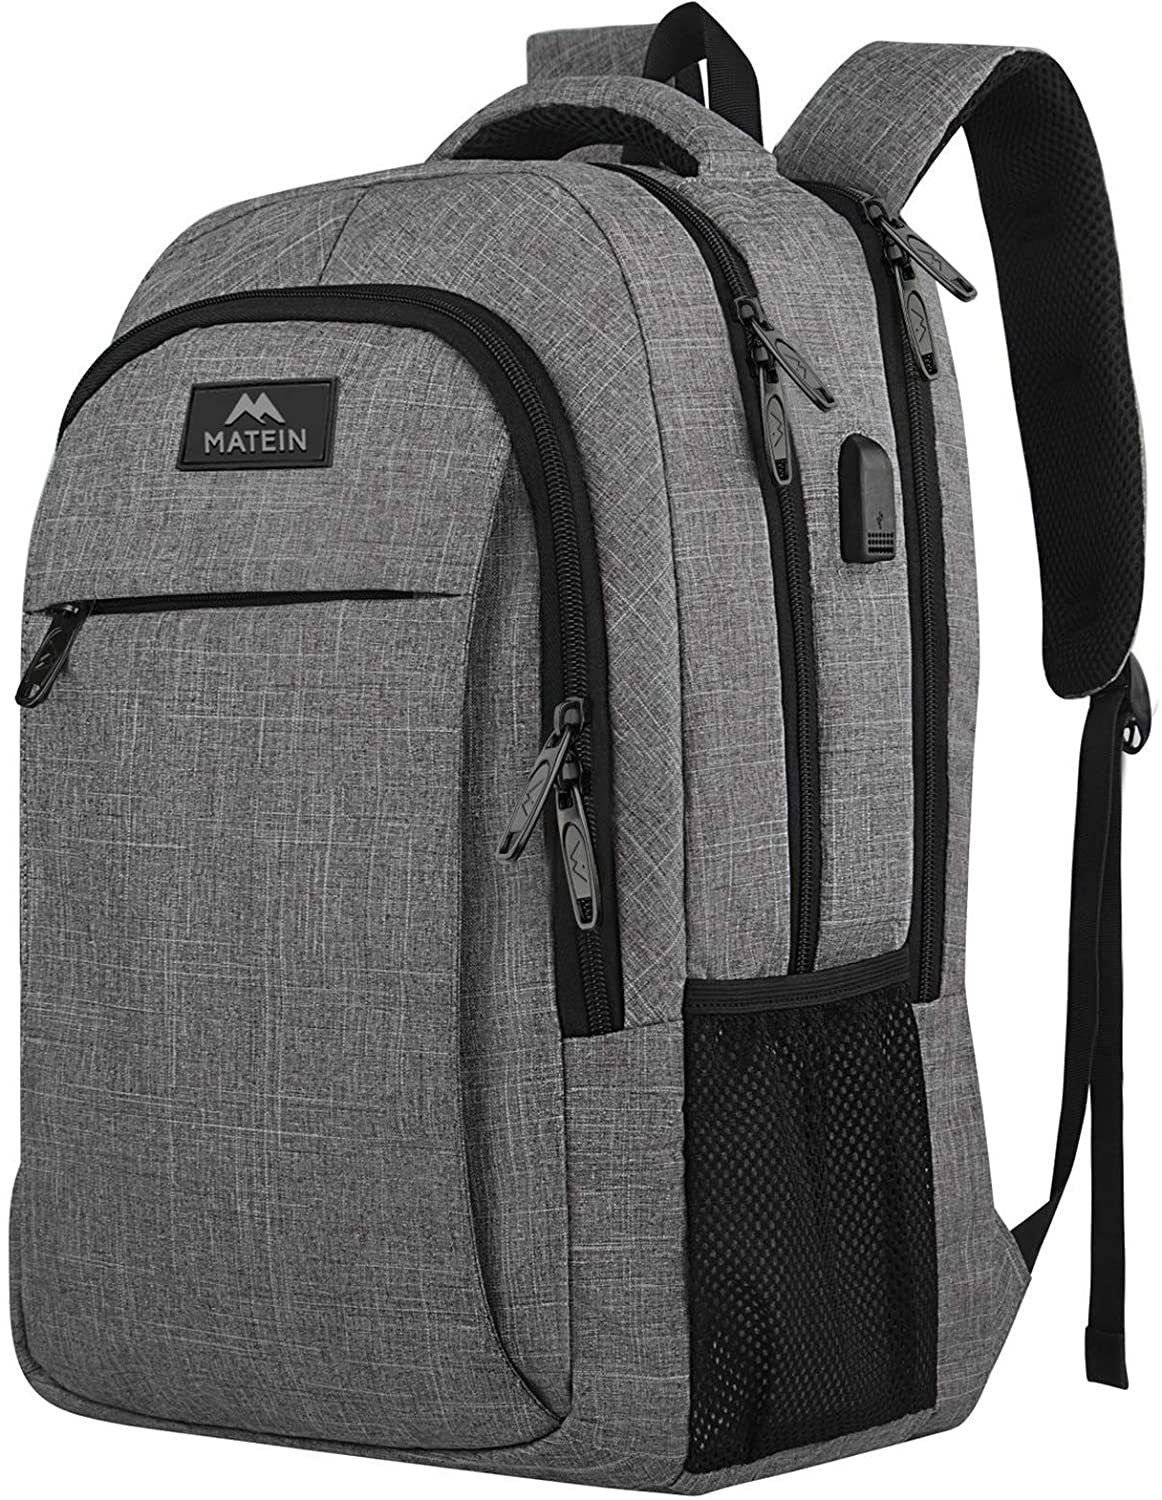 Travel Laptop Backpack - WorkwearToronto.com - Christmas Gift Ideas for him in 2020 - Gifts for men - Amazon